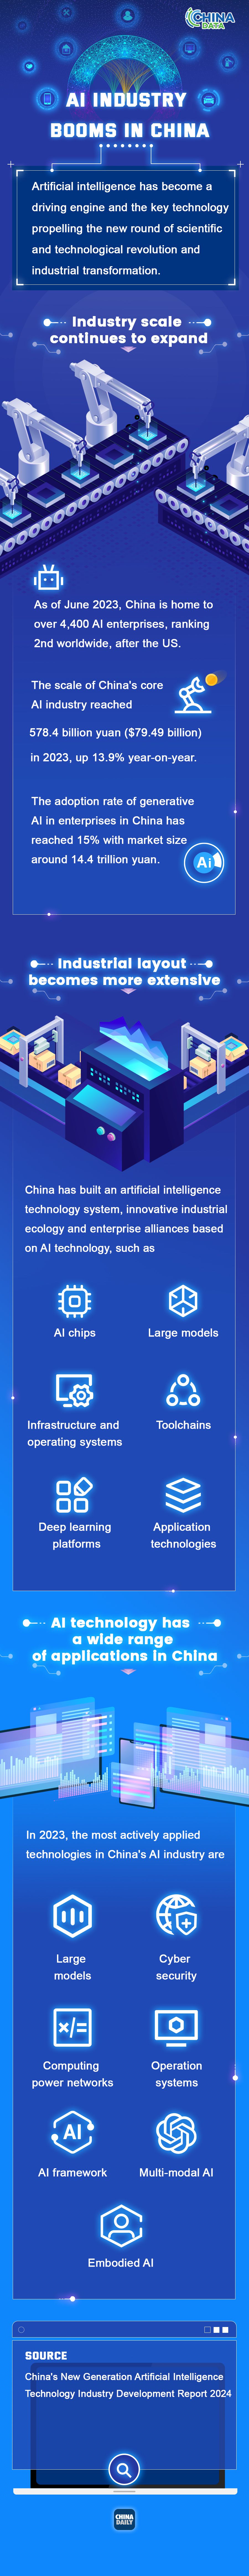 AI industry booms in China